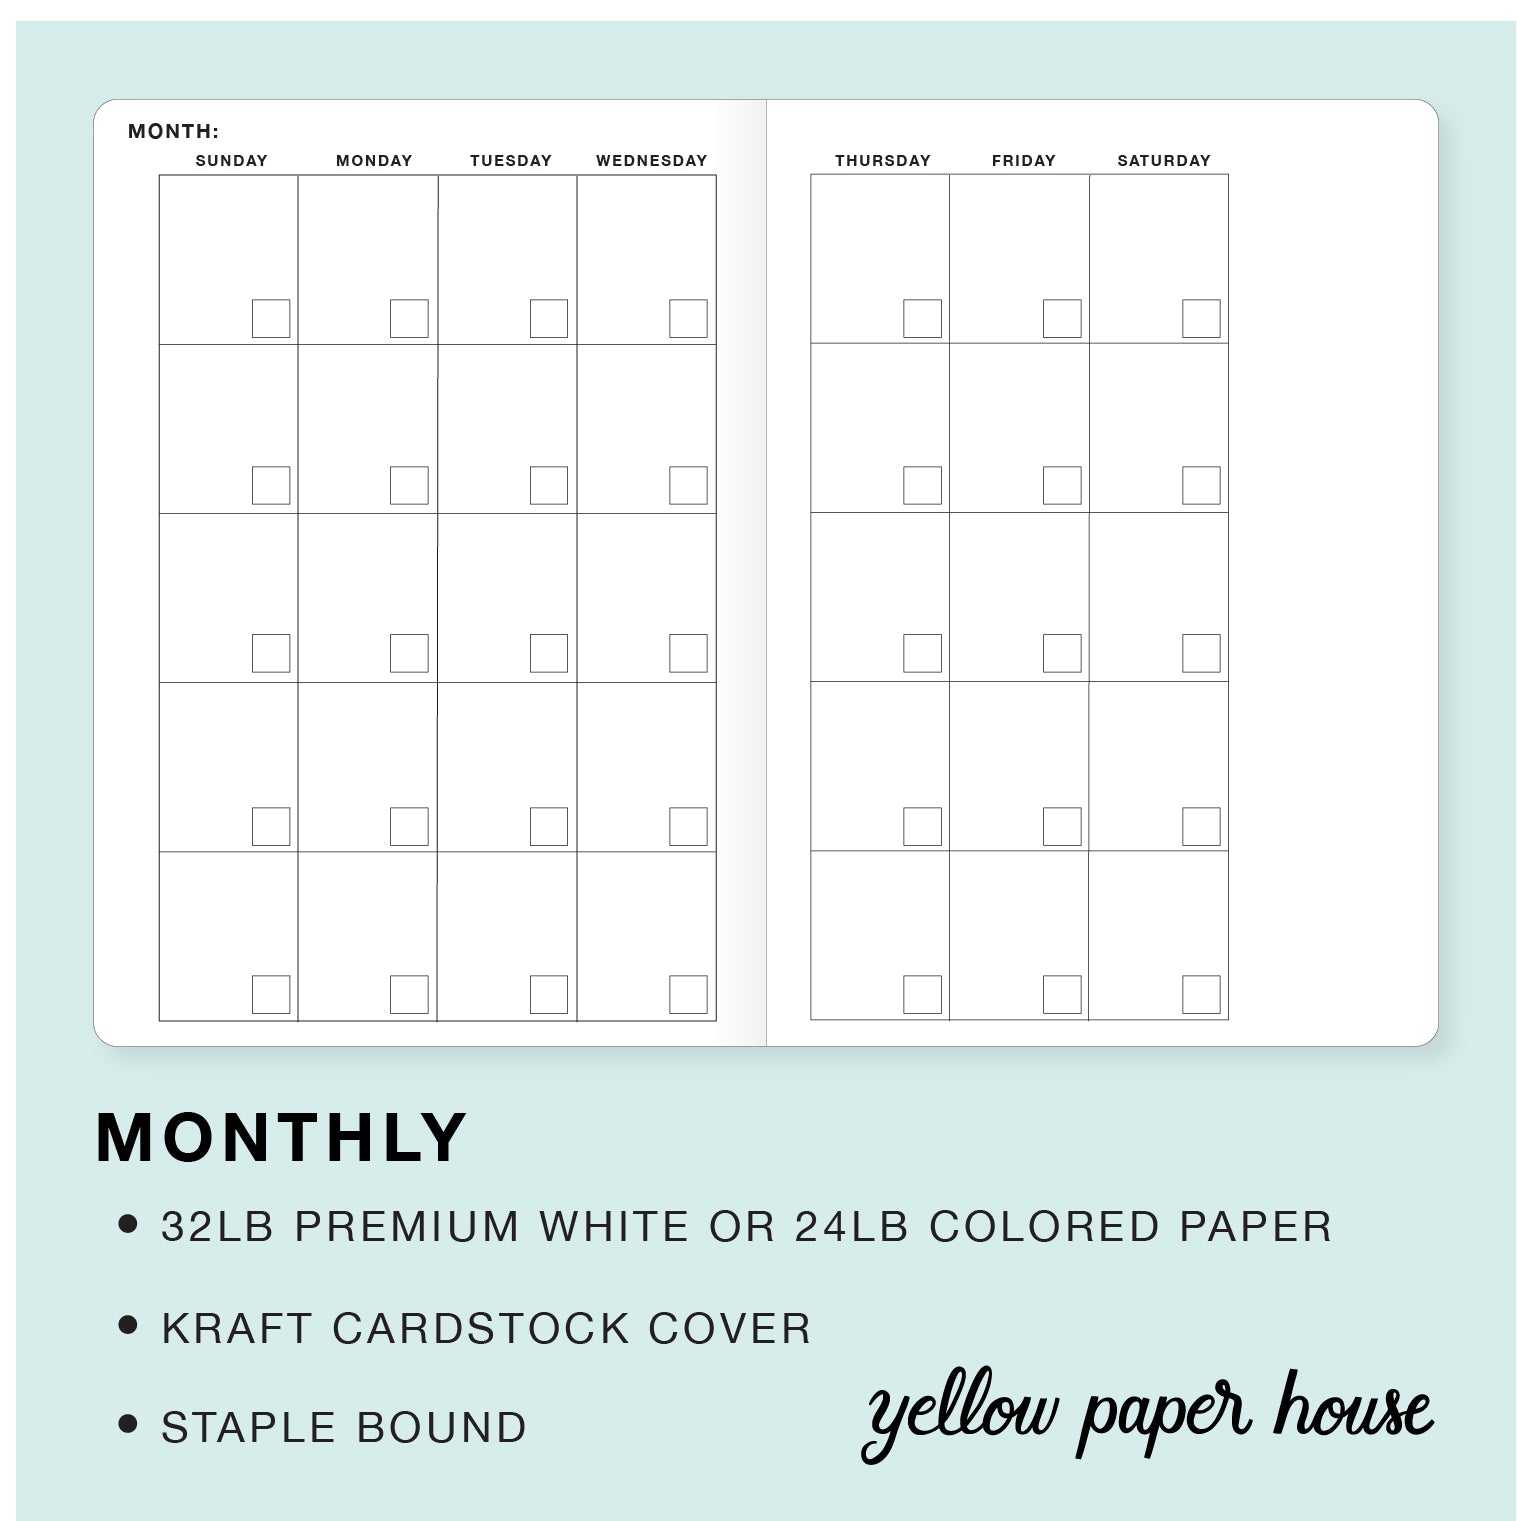 A5 Planner Monthly Calendar Inserts